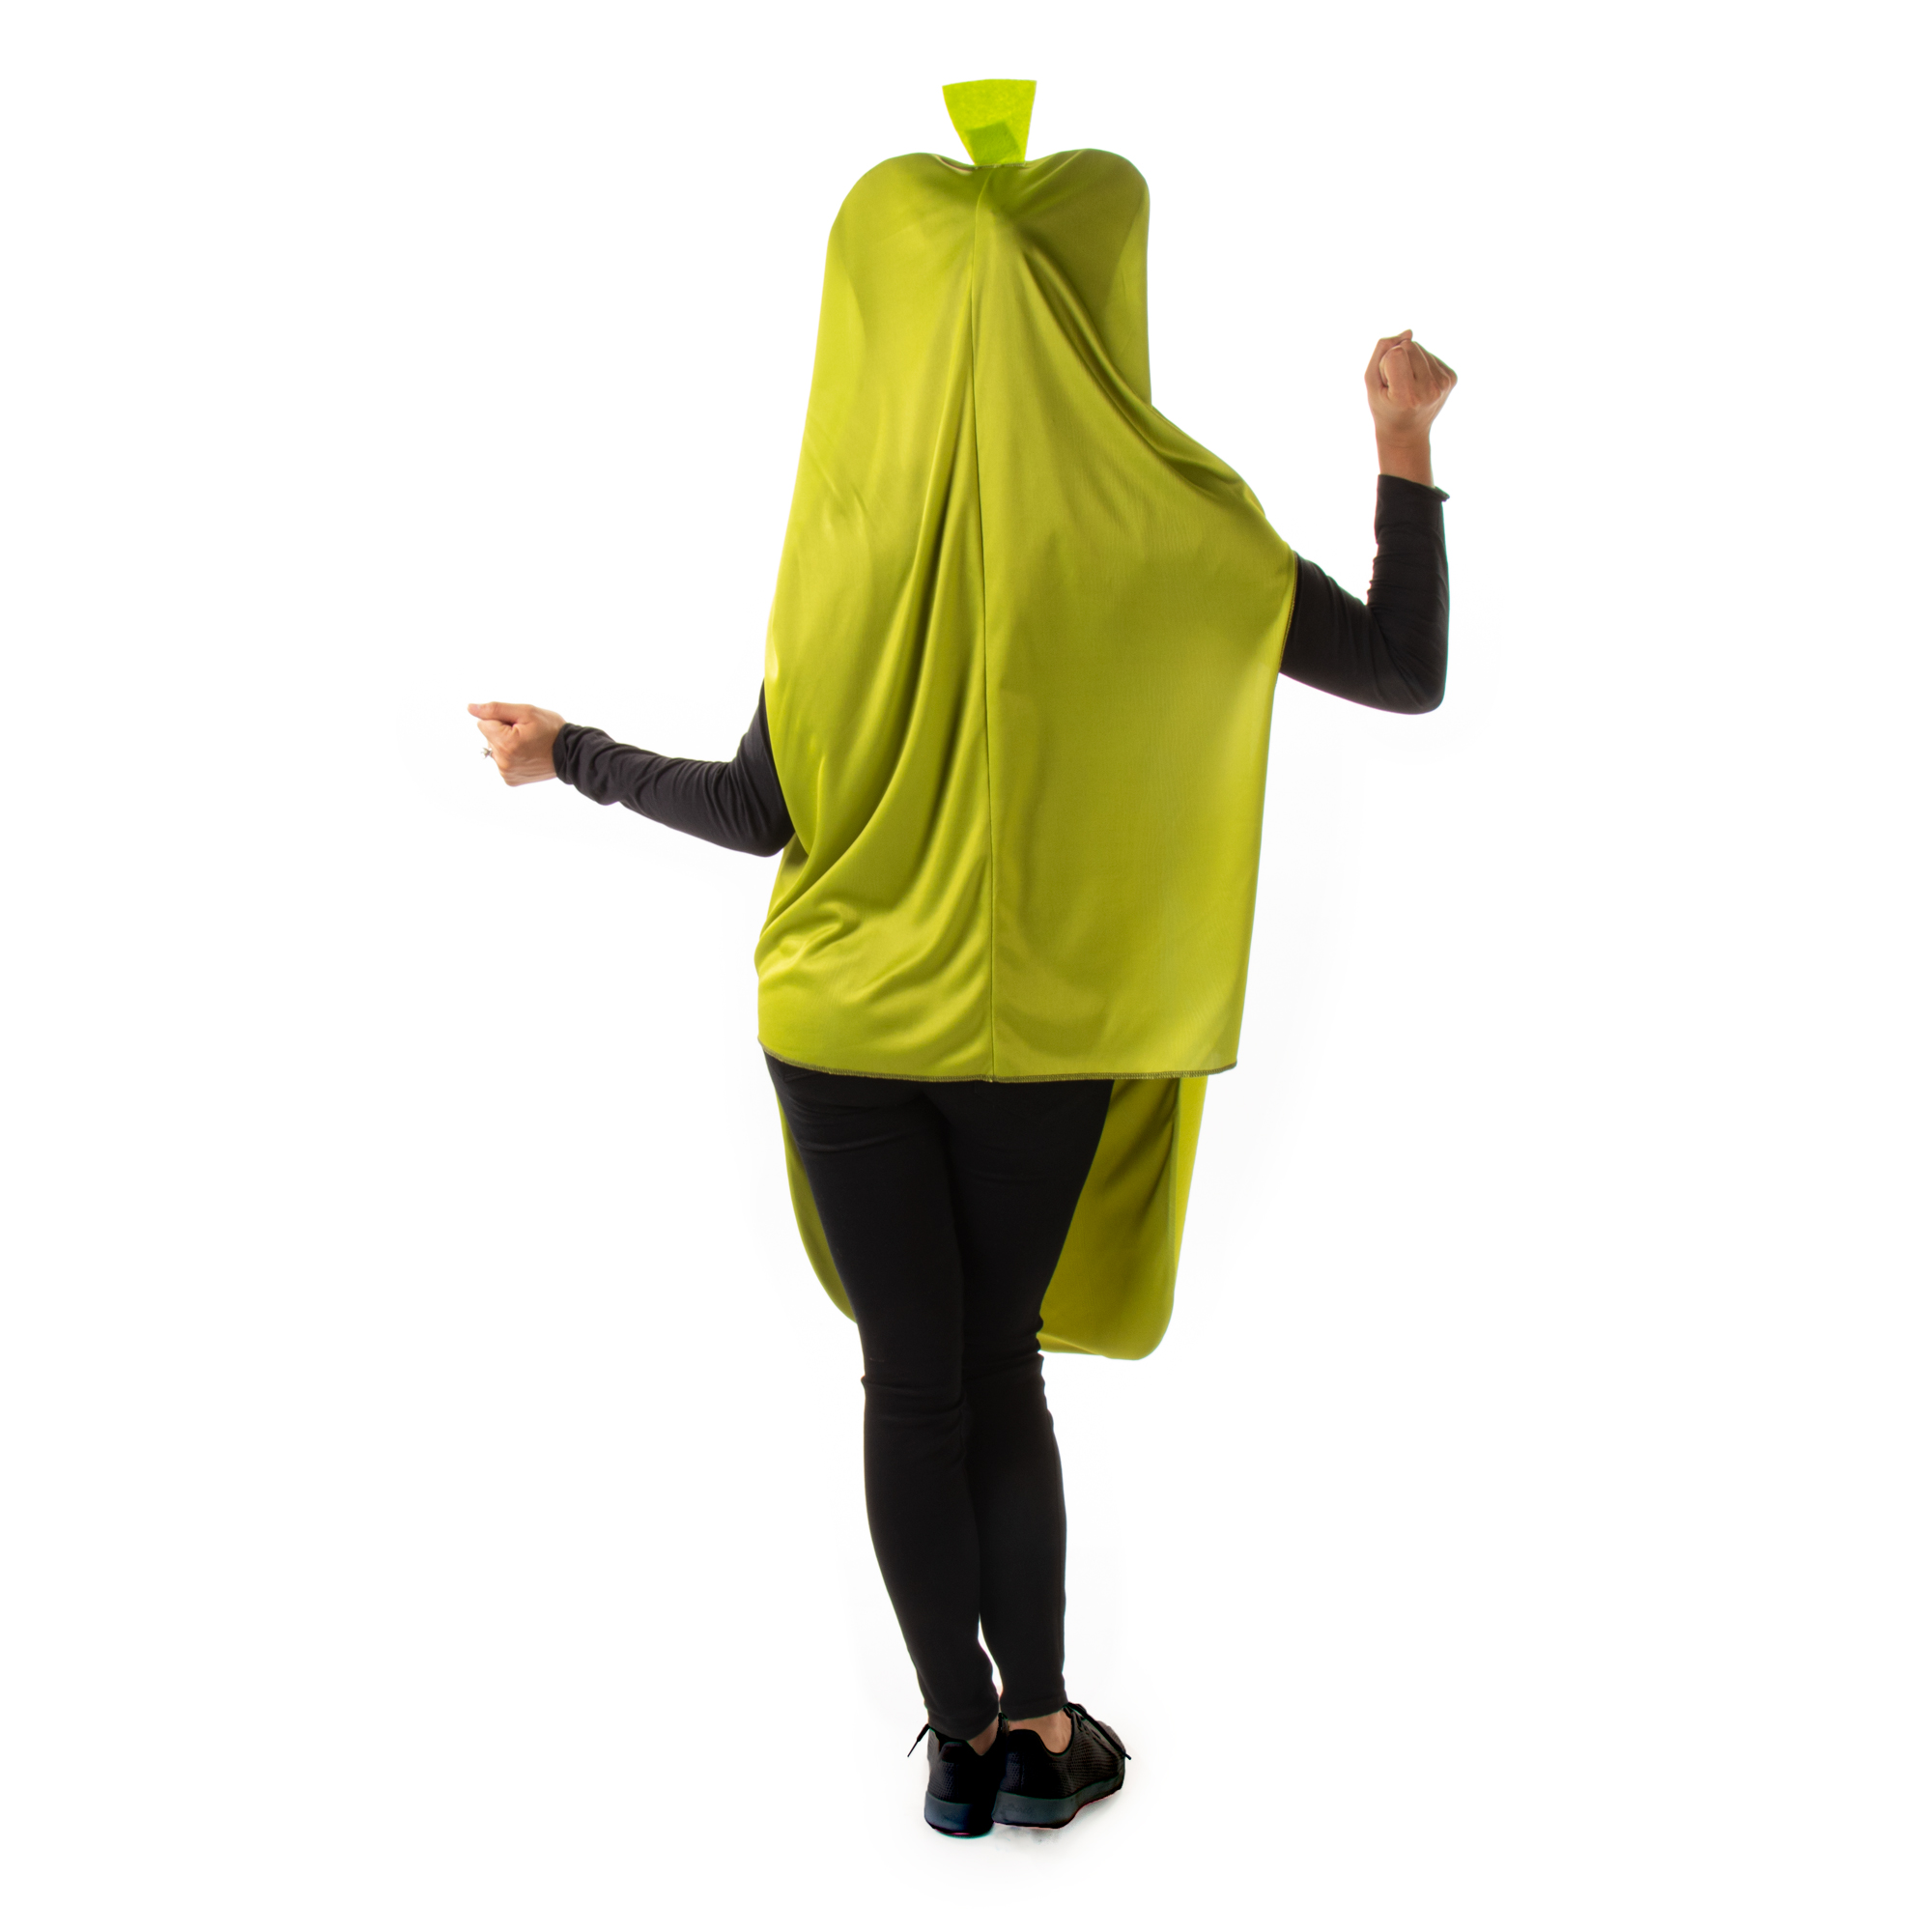 Pregnancy Craving Couples Costume - Funny Ice Cream Pickle Food Halloween Outfit - image 4 of 5